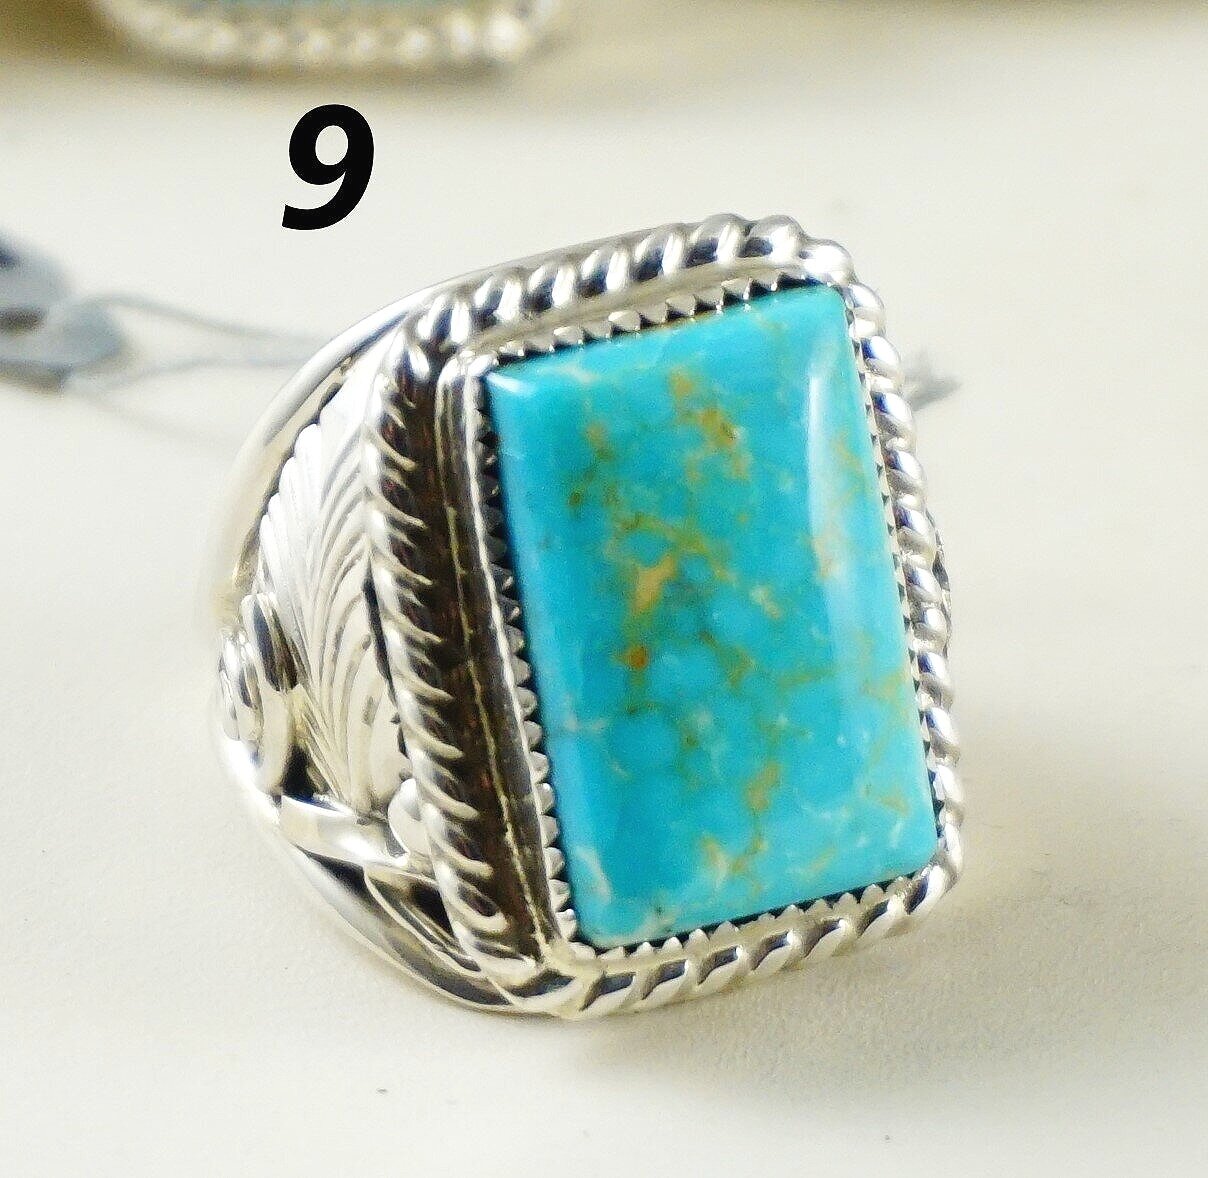 Mens Turquoise Ring Turquoise Ring Royston Turquoise Ring Womens Turquoise Ring Mens Square Ring Square Turquoise Ring, Size 7